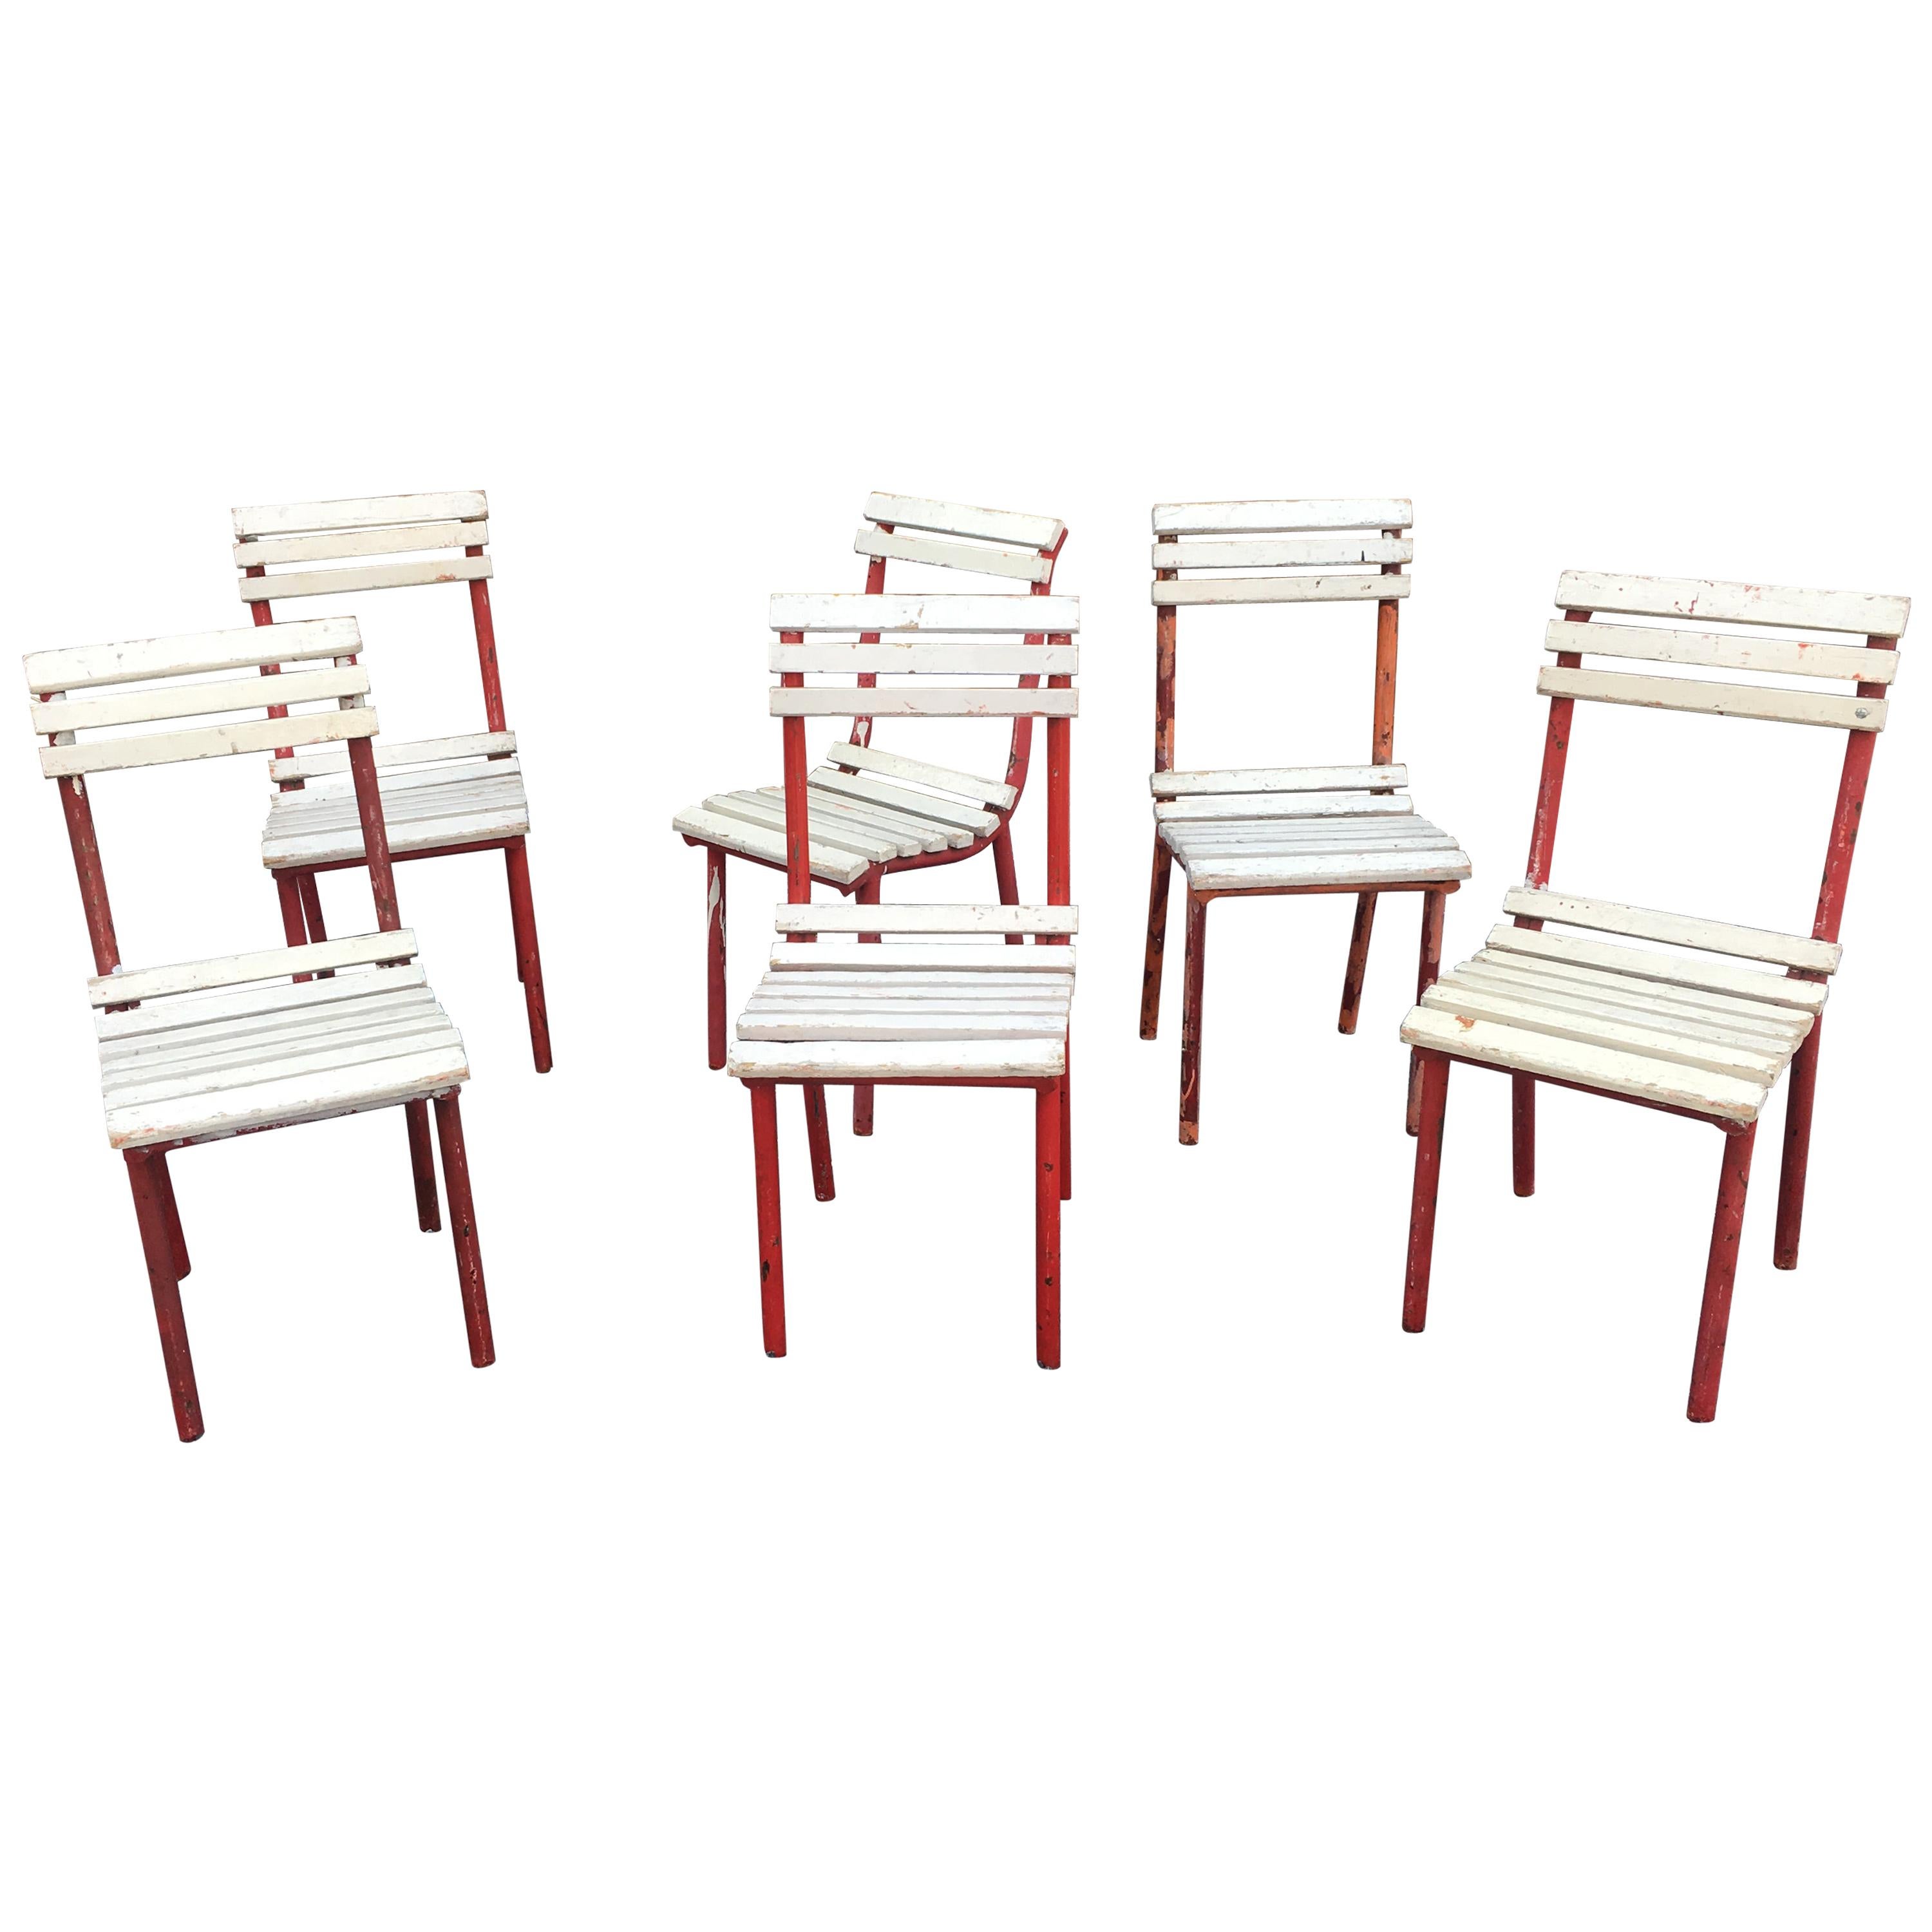 Six Modernist Art Deco Chairs in the Style of  Robert Mallet Stevens